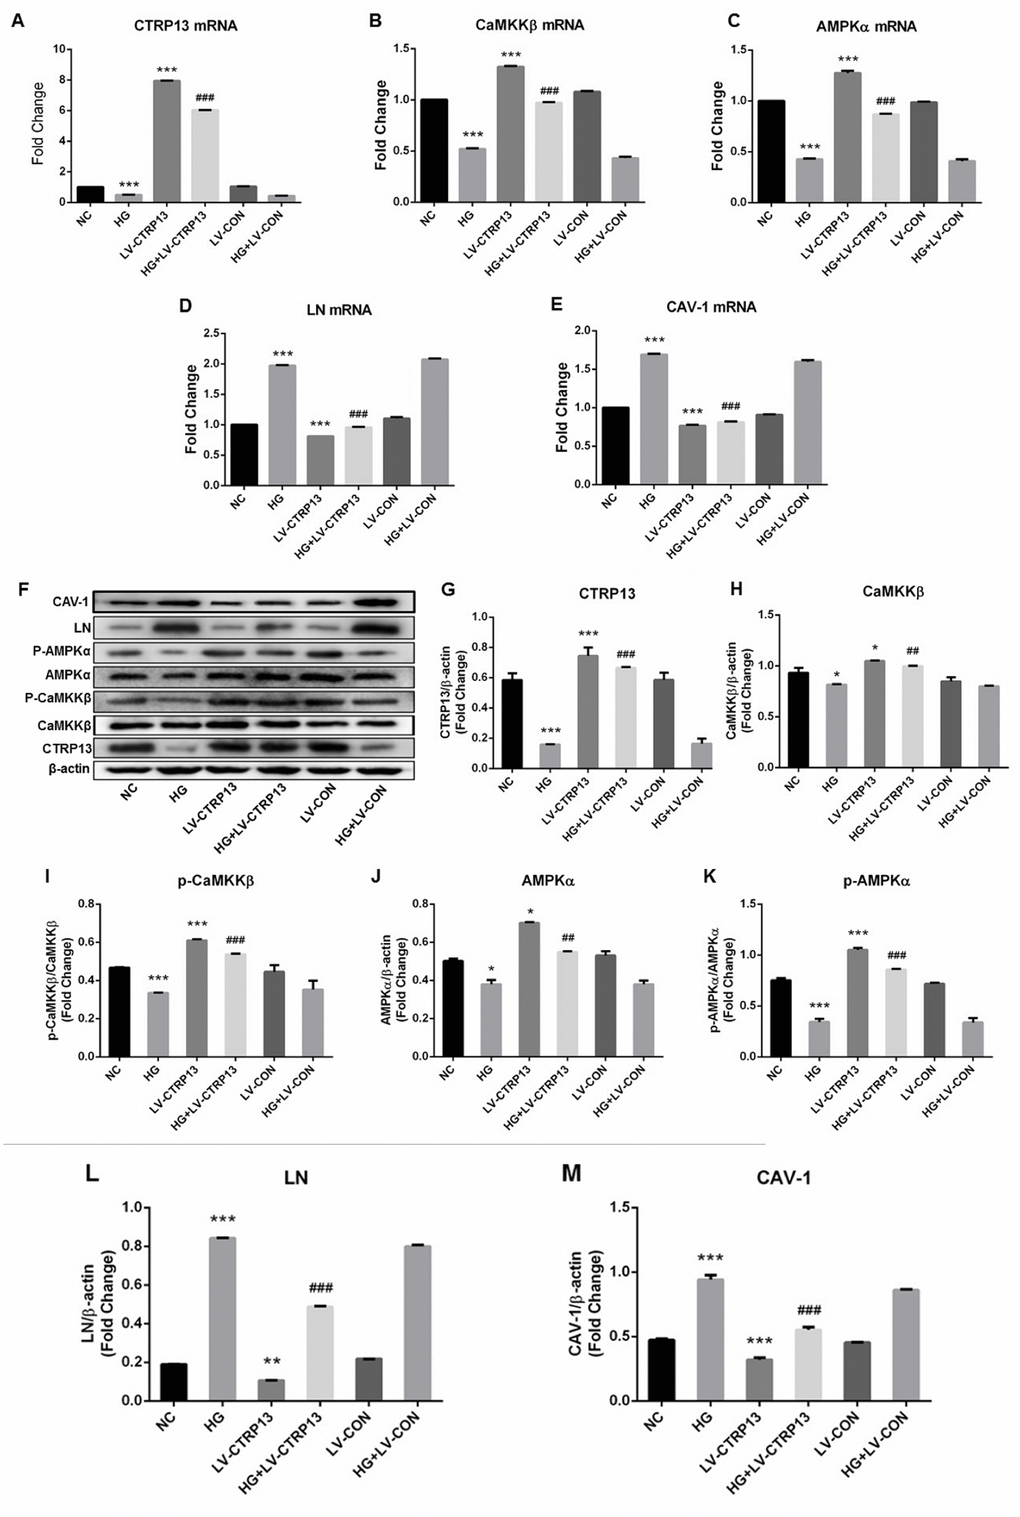 The effect of high glucose on the expression levels of CTRP13, p-CaMKKβ, CaMKKβ, p-AMPK, AMPK, LN and CAV-1 in rLSECs transfected by recombinant LV-CTRP13. (A) qRT-PCR analysis of CTRP13 mRNA. (B) qRT-PCR analysis of CaMKKβ mRNA. (C) qRT-PCR analysis of AMPKα mRNA. (D) qRT-PCR analysis of LN mRNA. (E) qRT-PCR analysis of CAV-1 mRNA. (A–E) The results were normalised to β-actin mRNA levels. (F) The protein expression levels of each group were detected using western blotting, and β-actin was used as a loading control. (G) Western blotting results showing relative CTRP13 expression. (H) Western blotting results showing relative CaMKKβ expression. (I) Western blotting results showing relative phos-CaMKKβ expression of CaMKKβ activation. (J) Western blotting results showing relative AMPKα expression. (K) Western blotting results showing relative phos-AMPKα expression of AMPKα activation. (L) Western blotting results showing relative LN expression. (M) Western blotting results showing relative CAV-1 expression. (F–M) β-actin (42 kDa) represents the loading control. All results are expressed as mean±S.D. from three independent experiments, *P **P ***P ##P ###P 